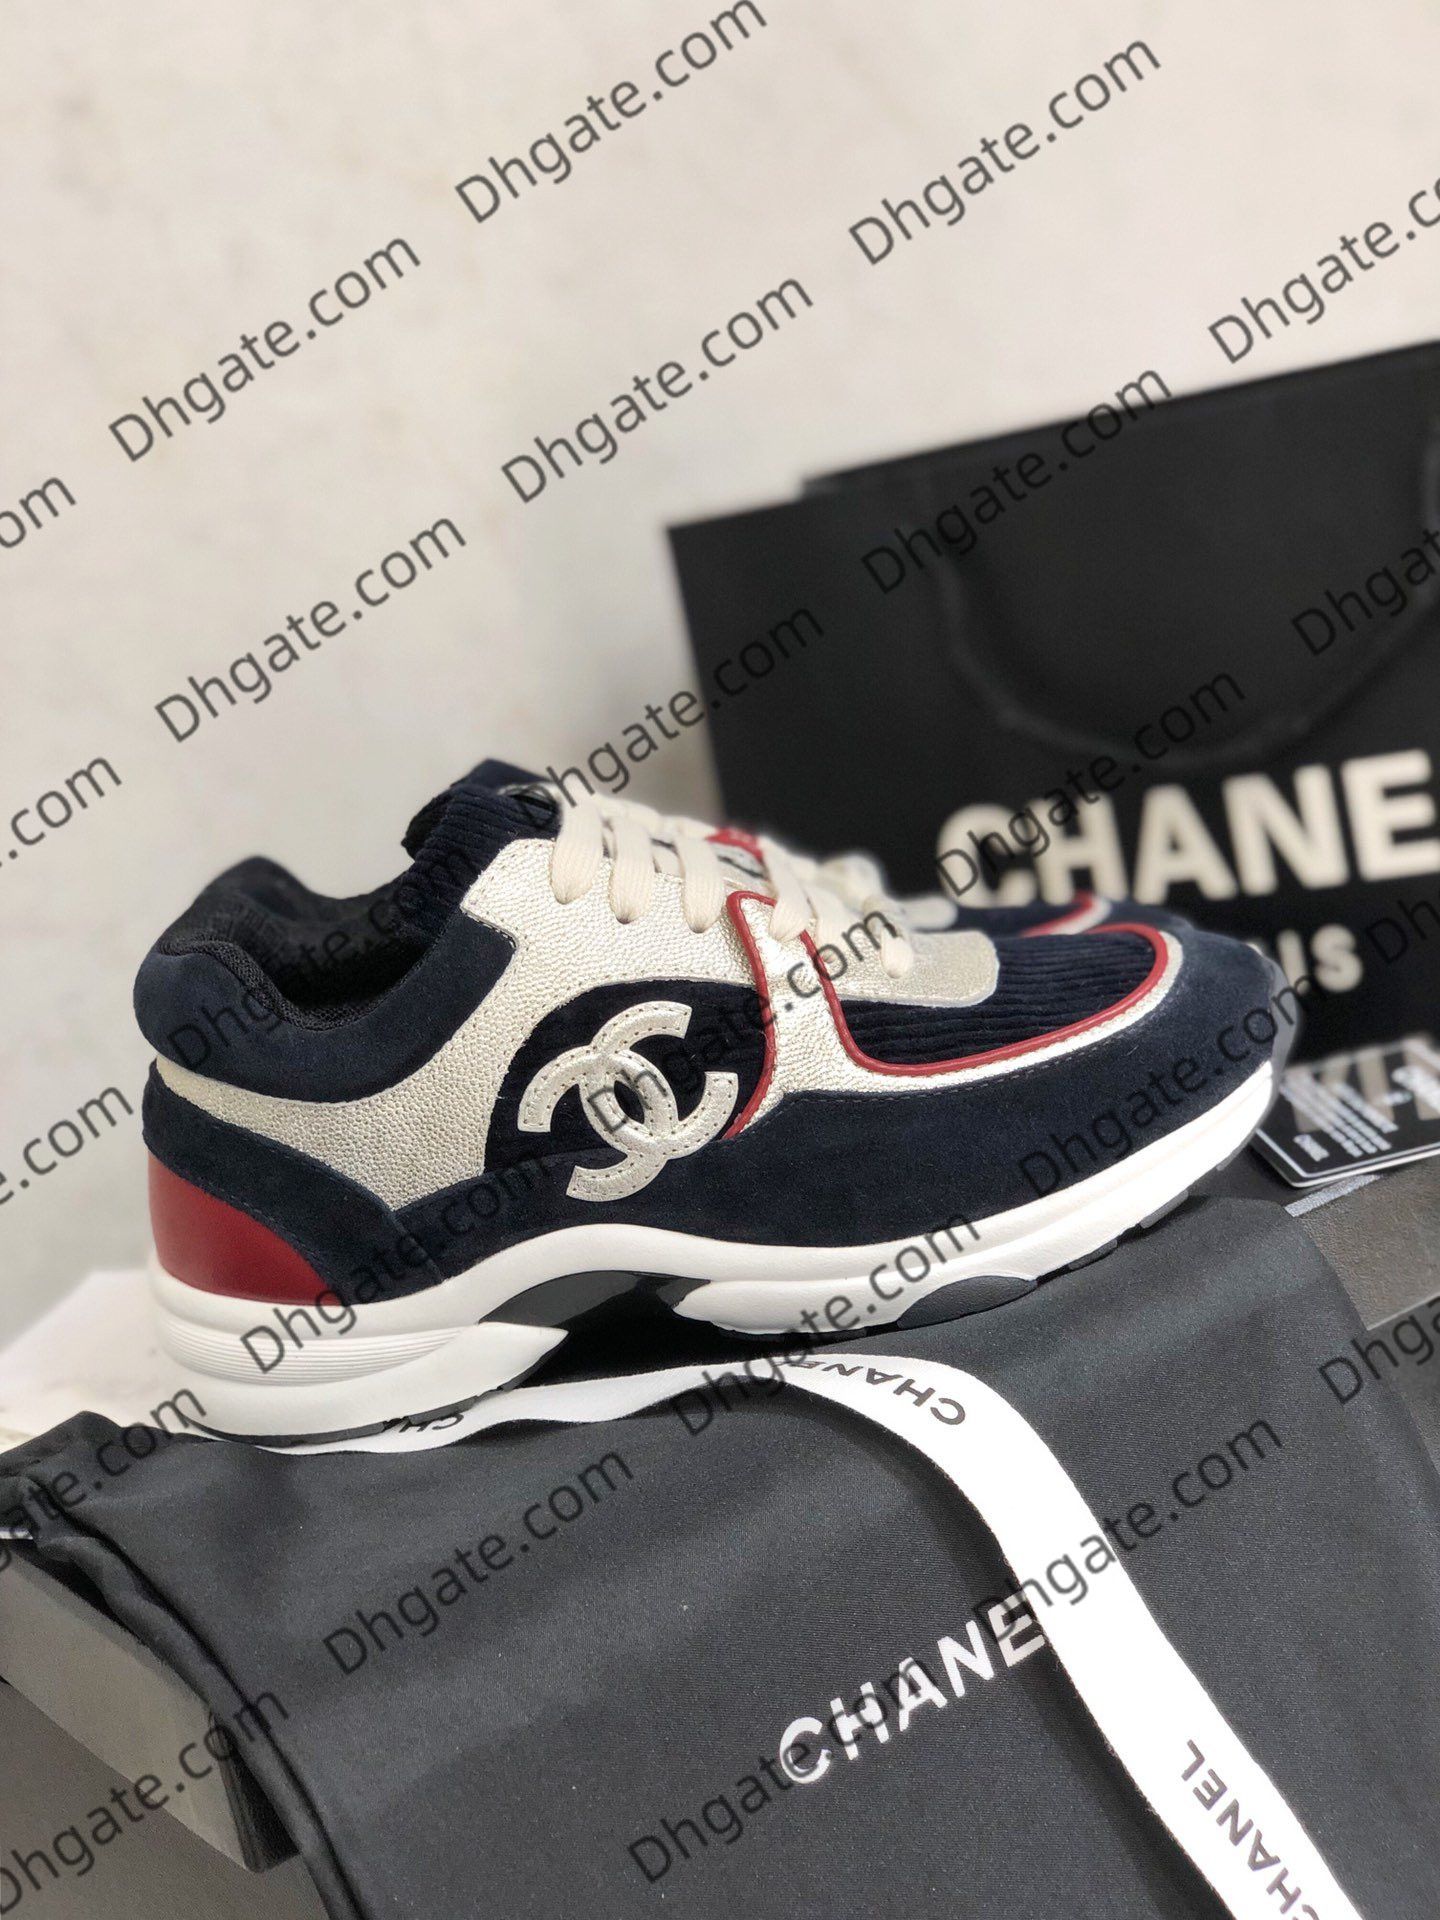 chanel shoes dhgate